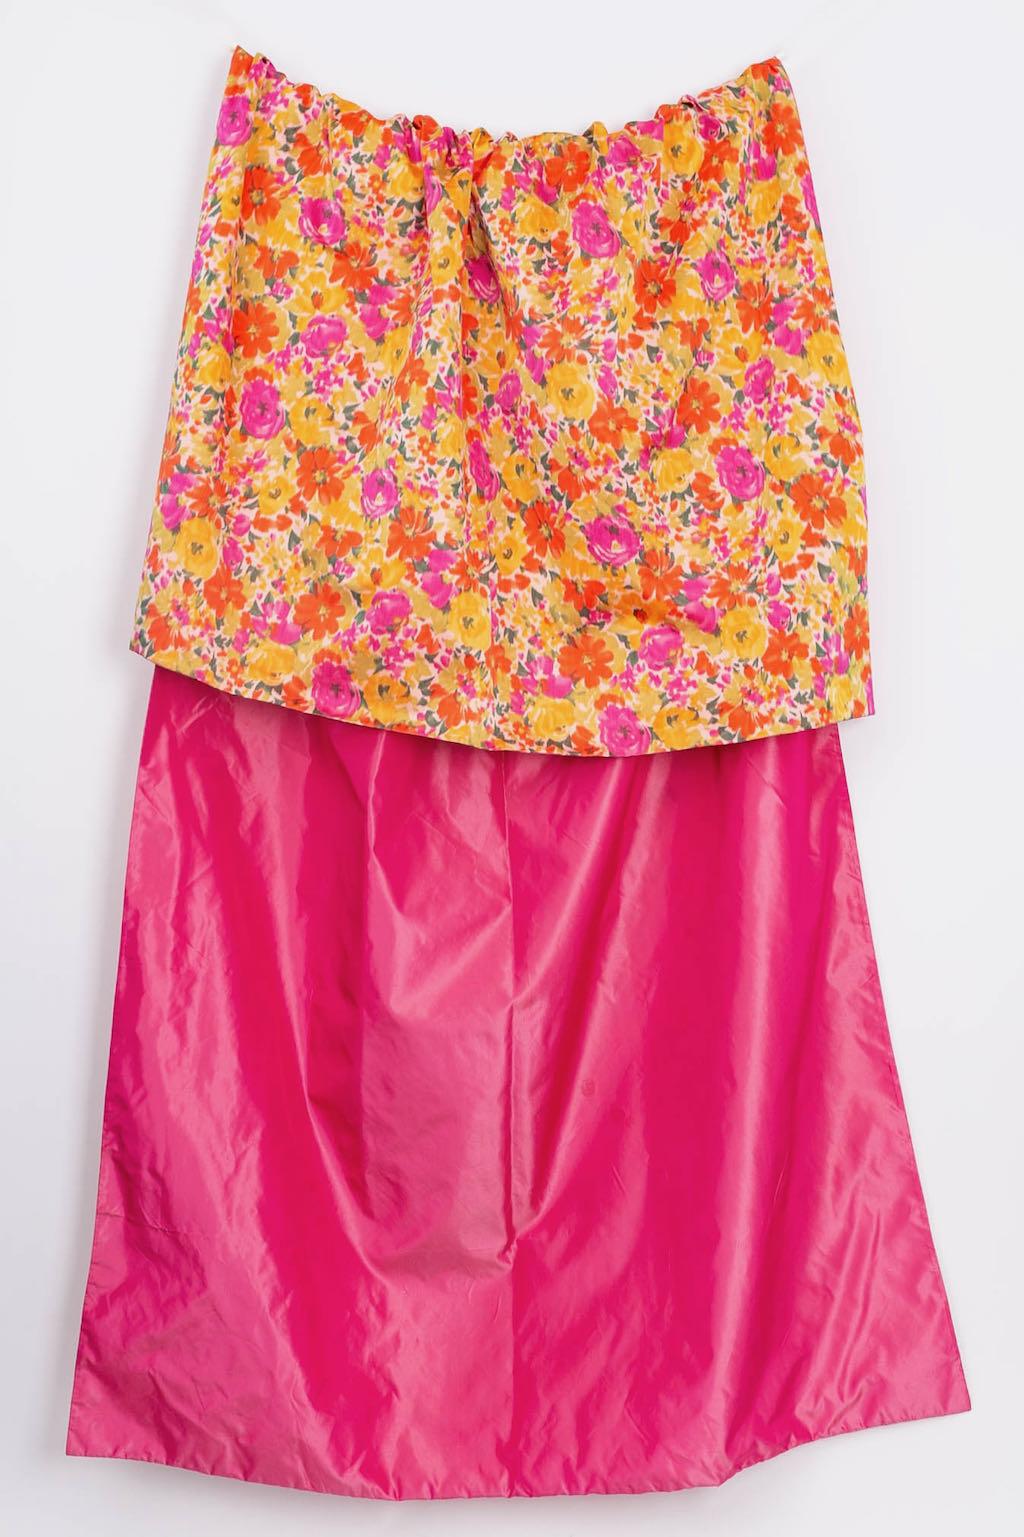 Nina Ricci Flower Silk Dress and its Stole For Sale 9